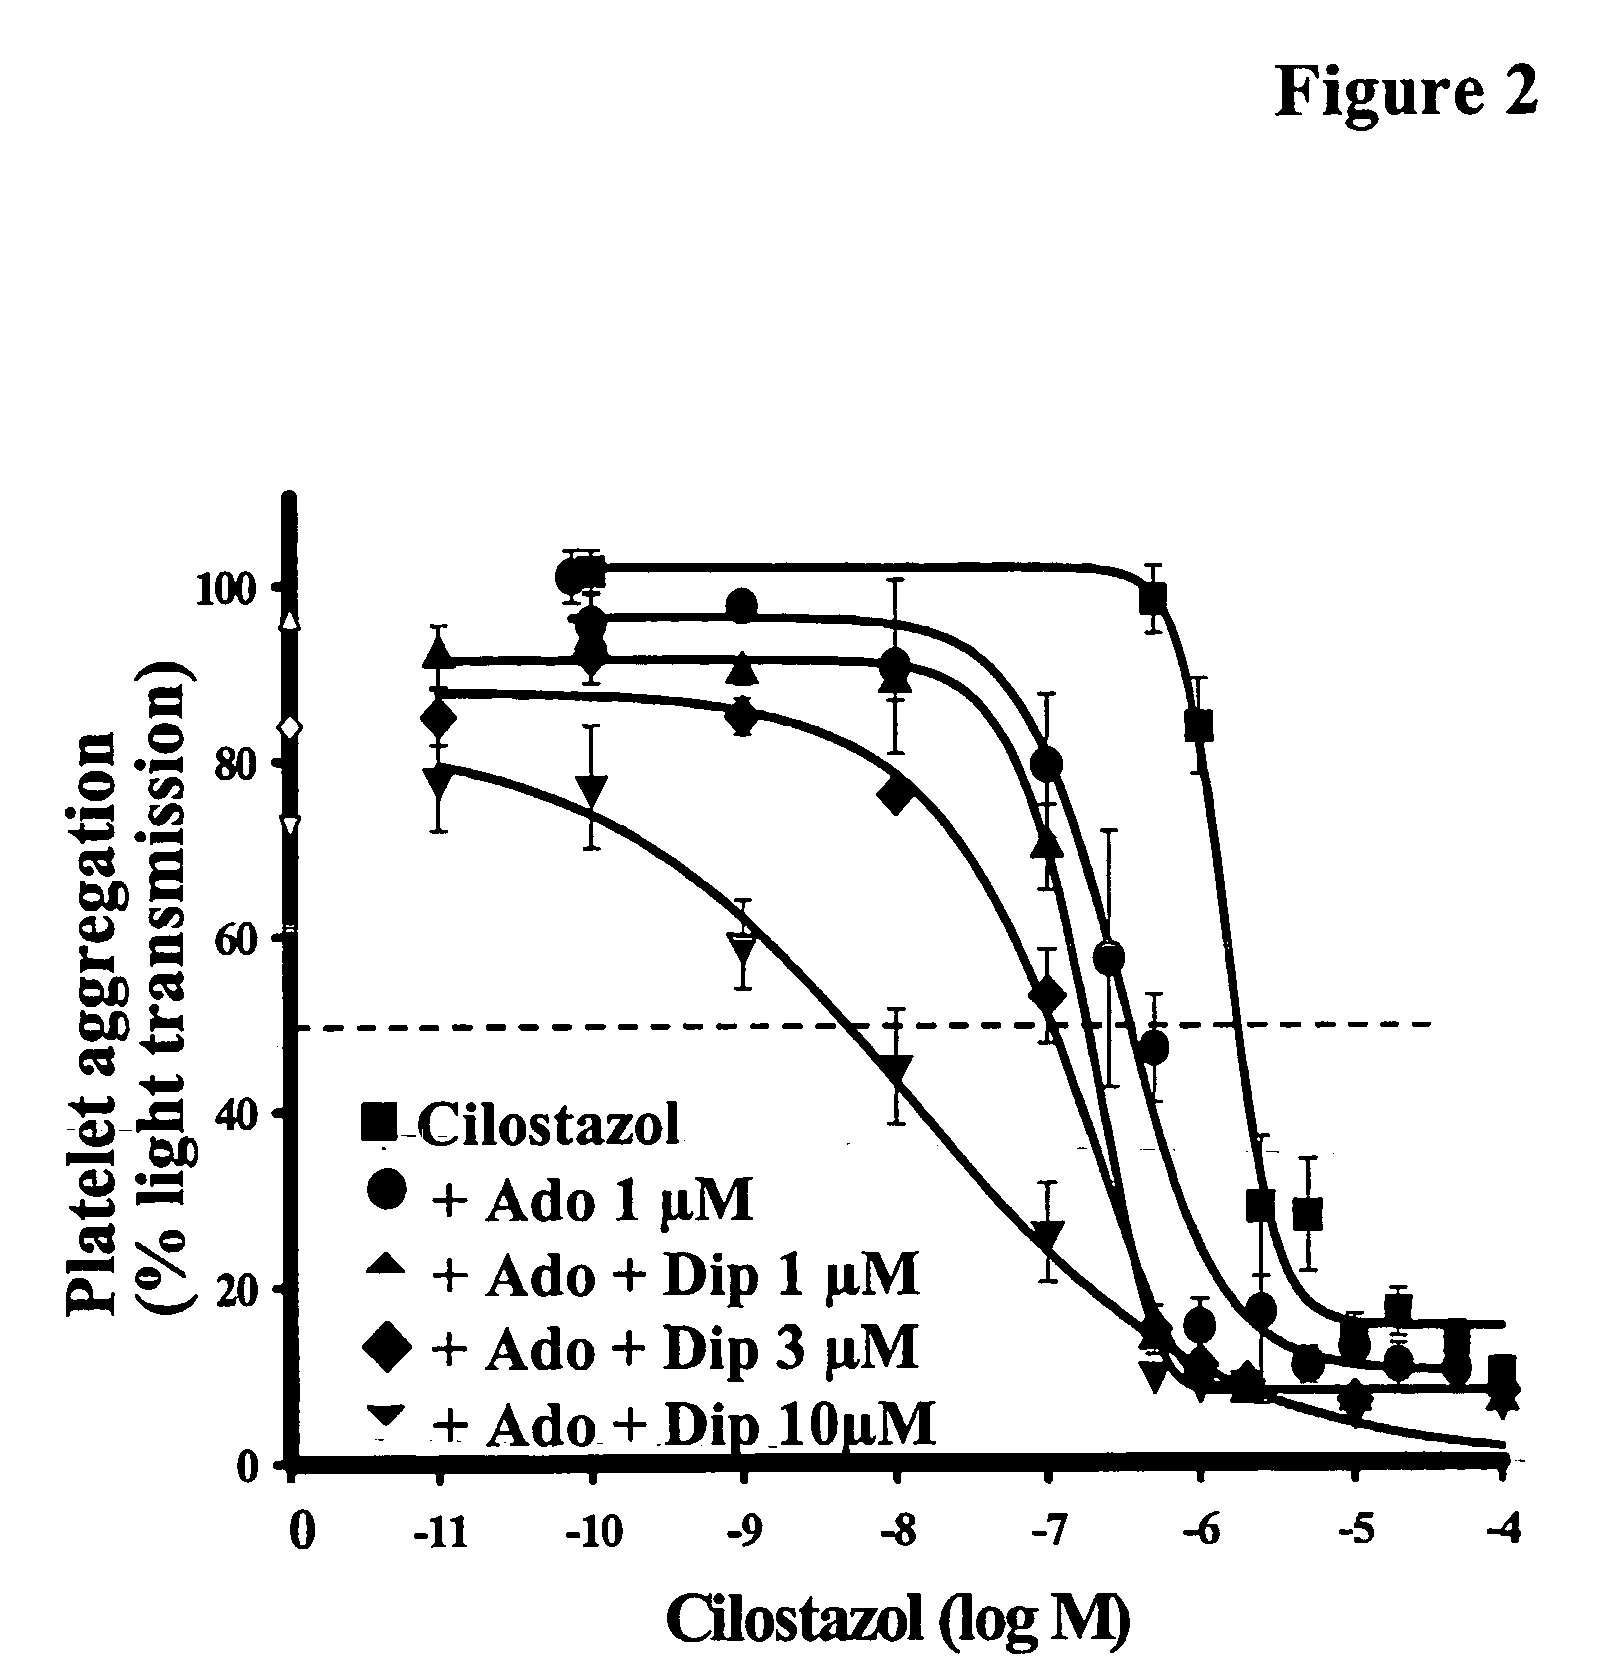 Pharmaceutical compositions comprising a multifunctional phosphodiesterase inhibitor and an adenosine uptake inhibitor